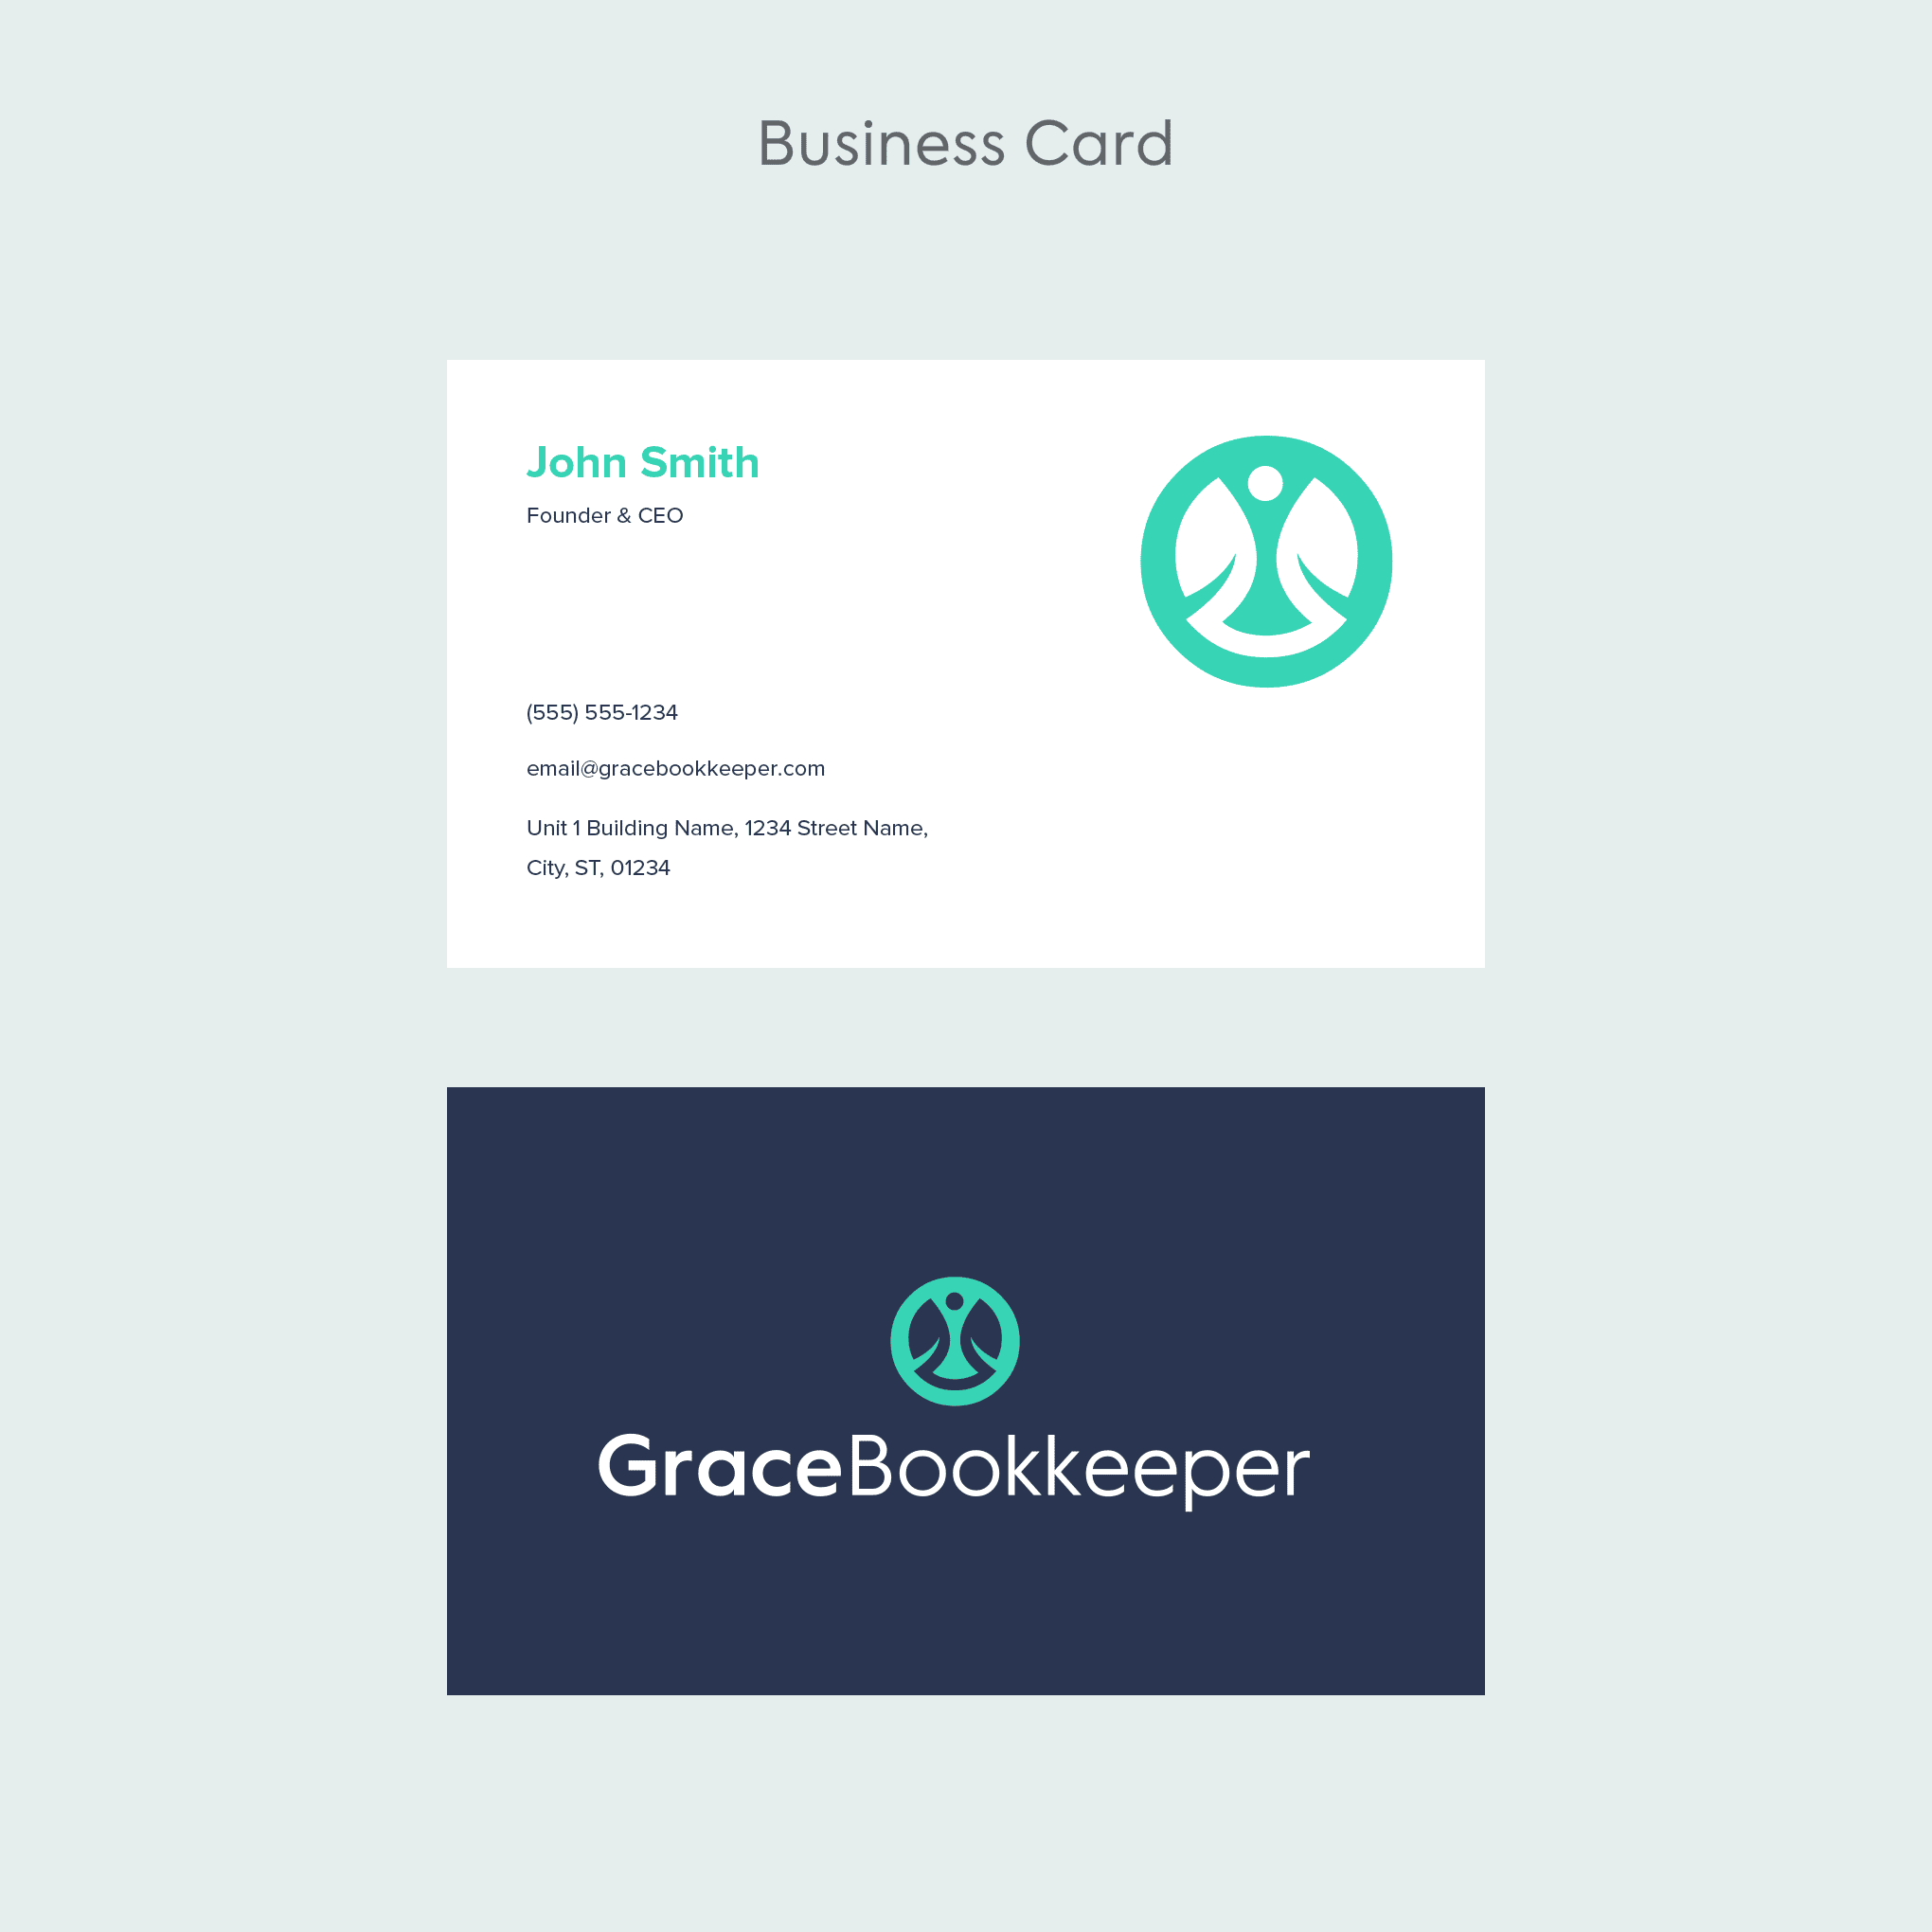 04 - Business Card Template (7)